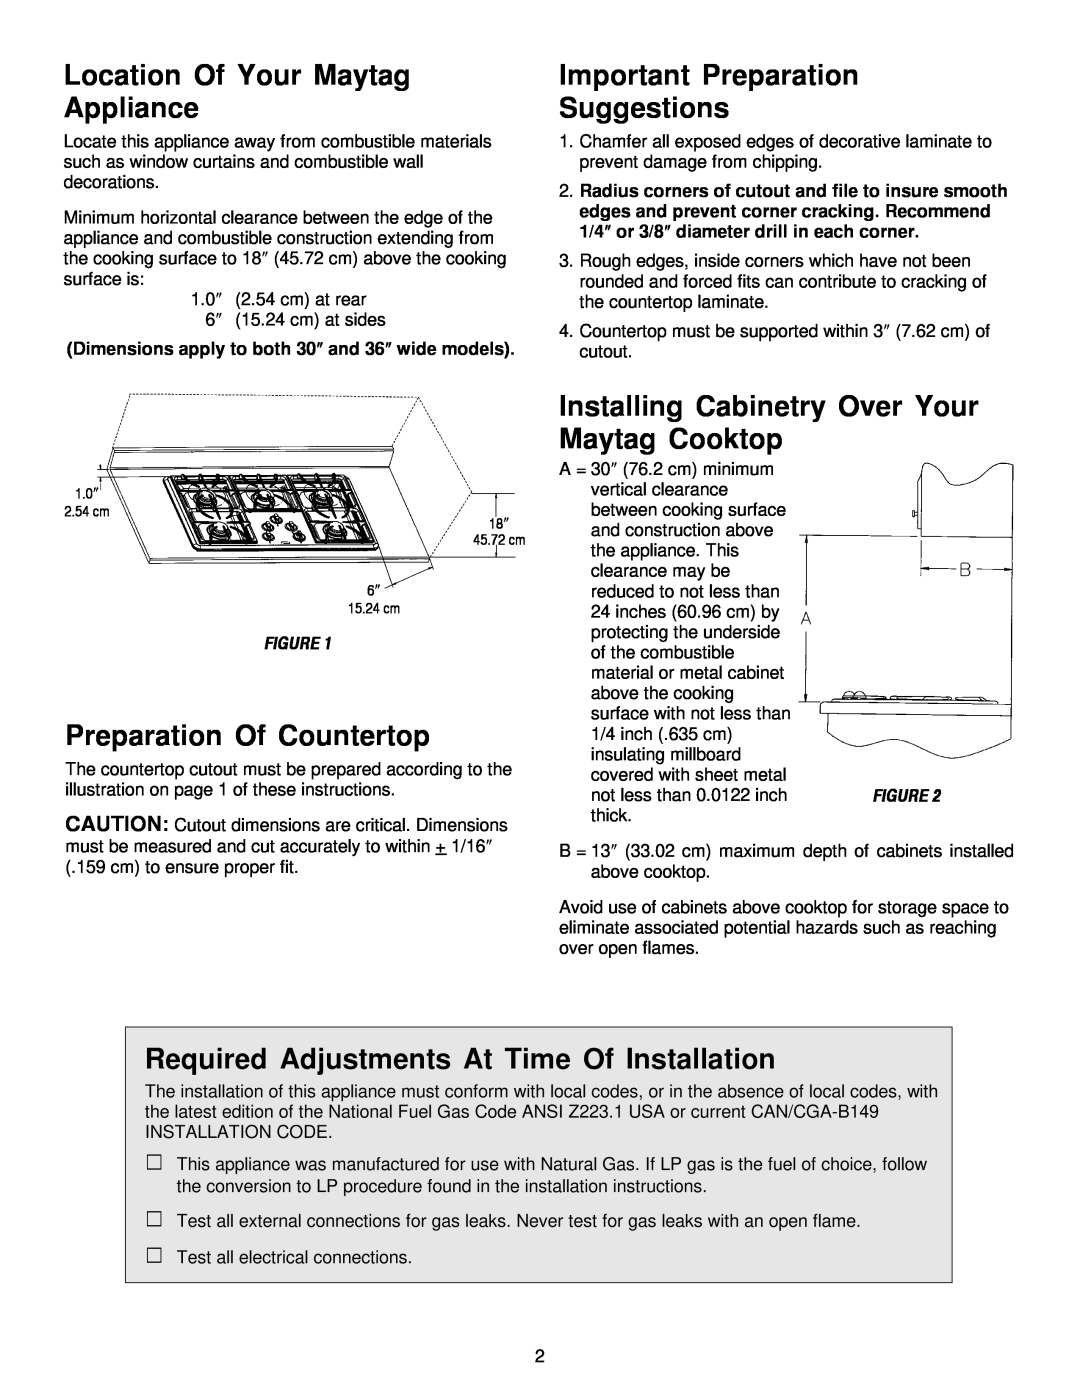 Maytag MGC5536 Location Of Your Maytag Appliance, Important Preparation Suggestions, Preparation Of Countertop 